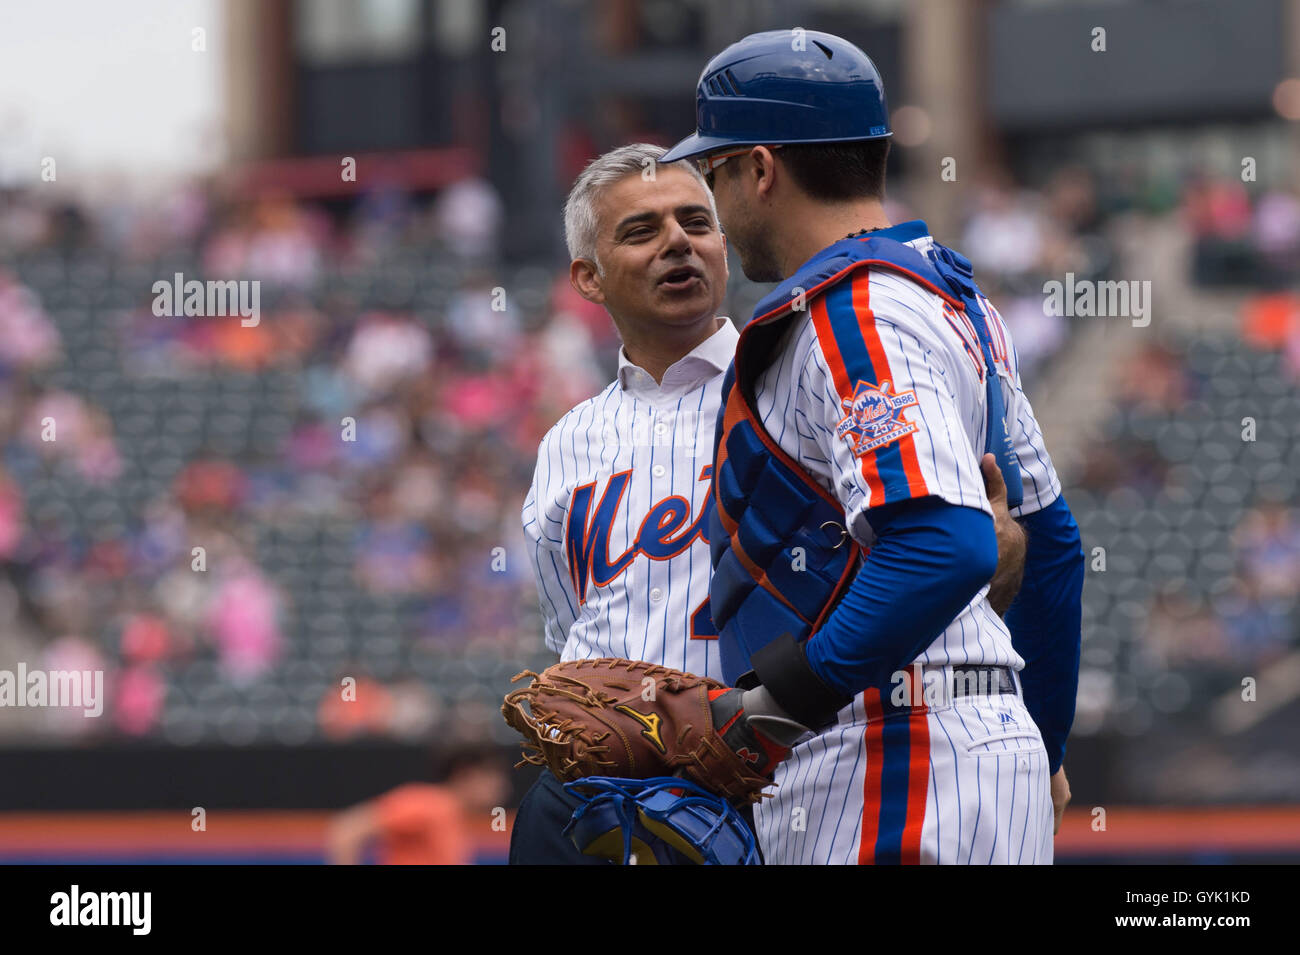 Mayor of London Sadiq Khan pitches the first ball at a baseball game between New York Mets and Minnesota Twins at Citi Field in New York City, during a three day visit to the US capital as part of his visit to North America, where he is due to meet NYC Mayor Bill de Blasio. Stock Photo